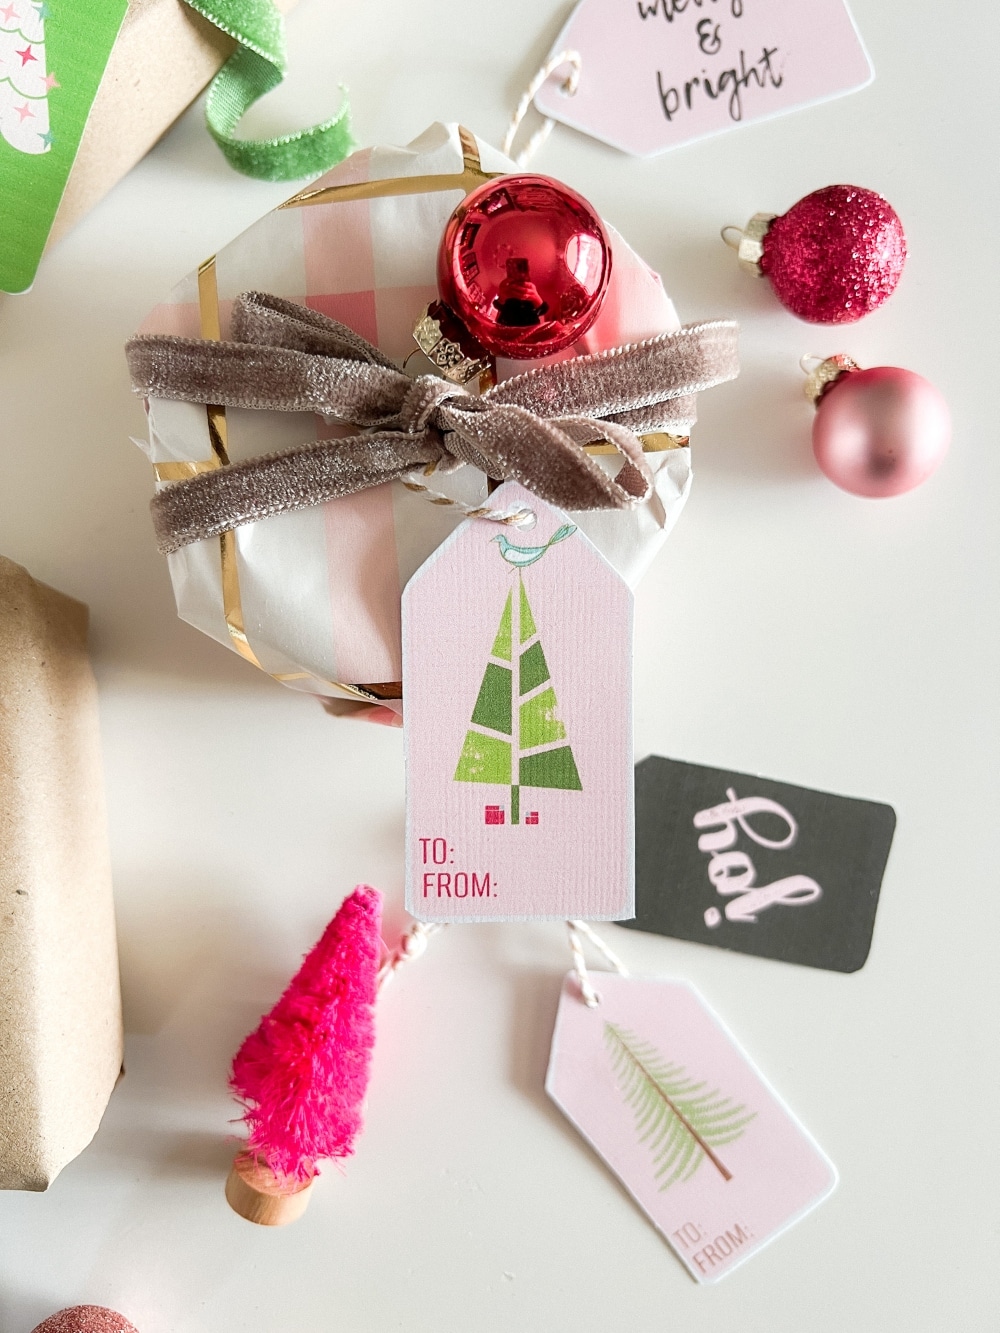 9 Bright Printable Holiday Gift Tags. Add some bright holiday tags to your gifts this year. These free bright and colorful printable tags are so easy to download, print off and add to your gifts this year! 